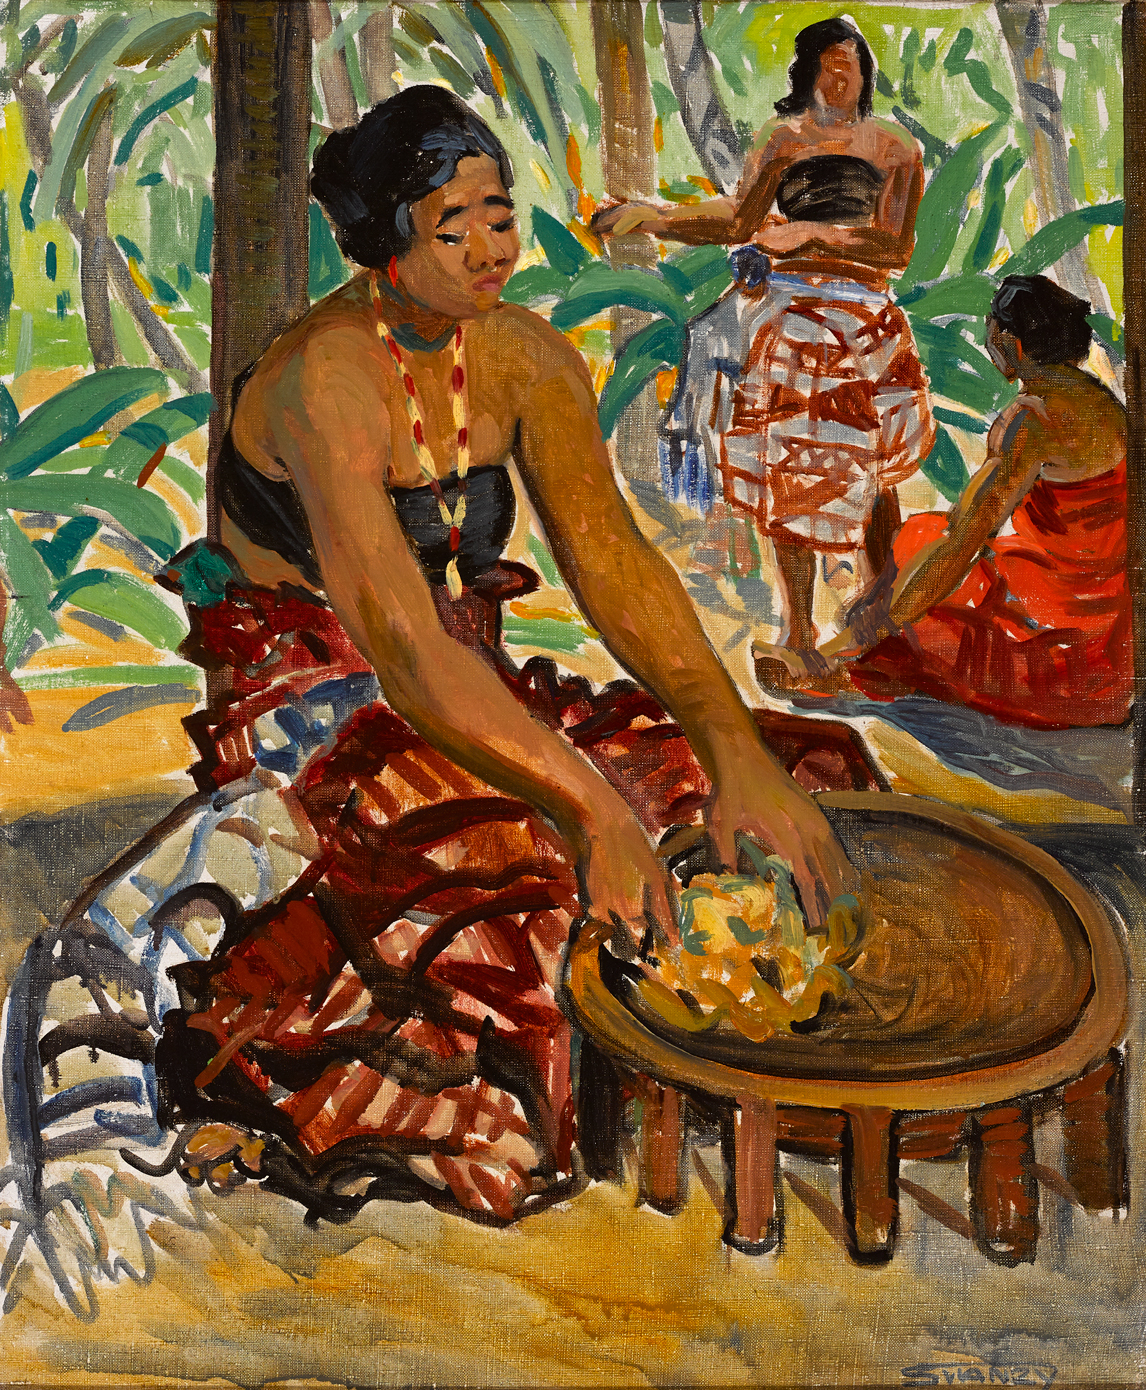 Mary Swanzy HRHA (1882-1978) PREPARING THE MEAL, SAMOA, c. 1919-25 oil on canvas signed lower right,